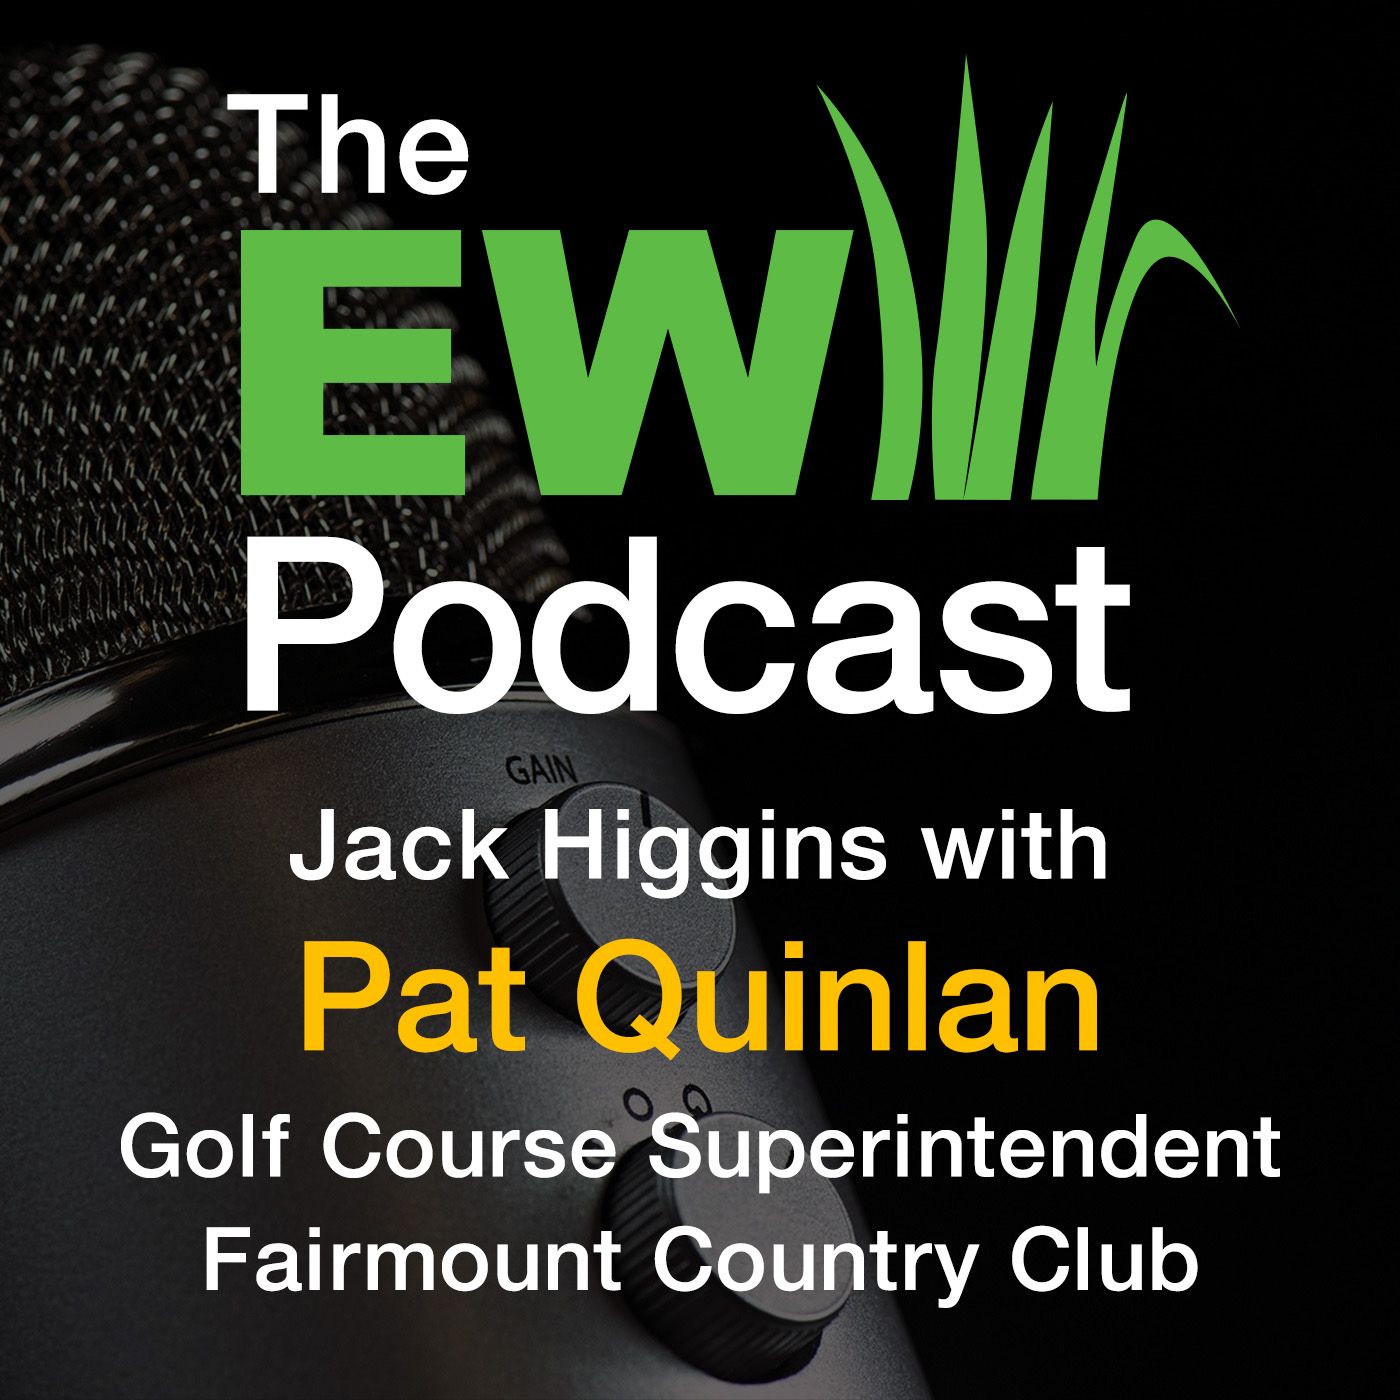 The EW Podcast - Jack Higgins with Pat Quinlan